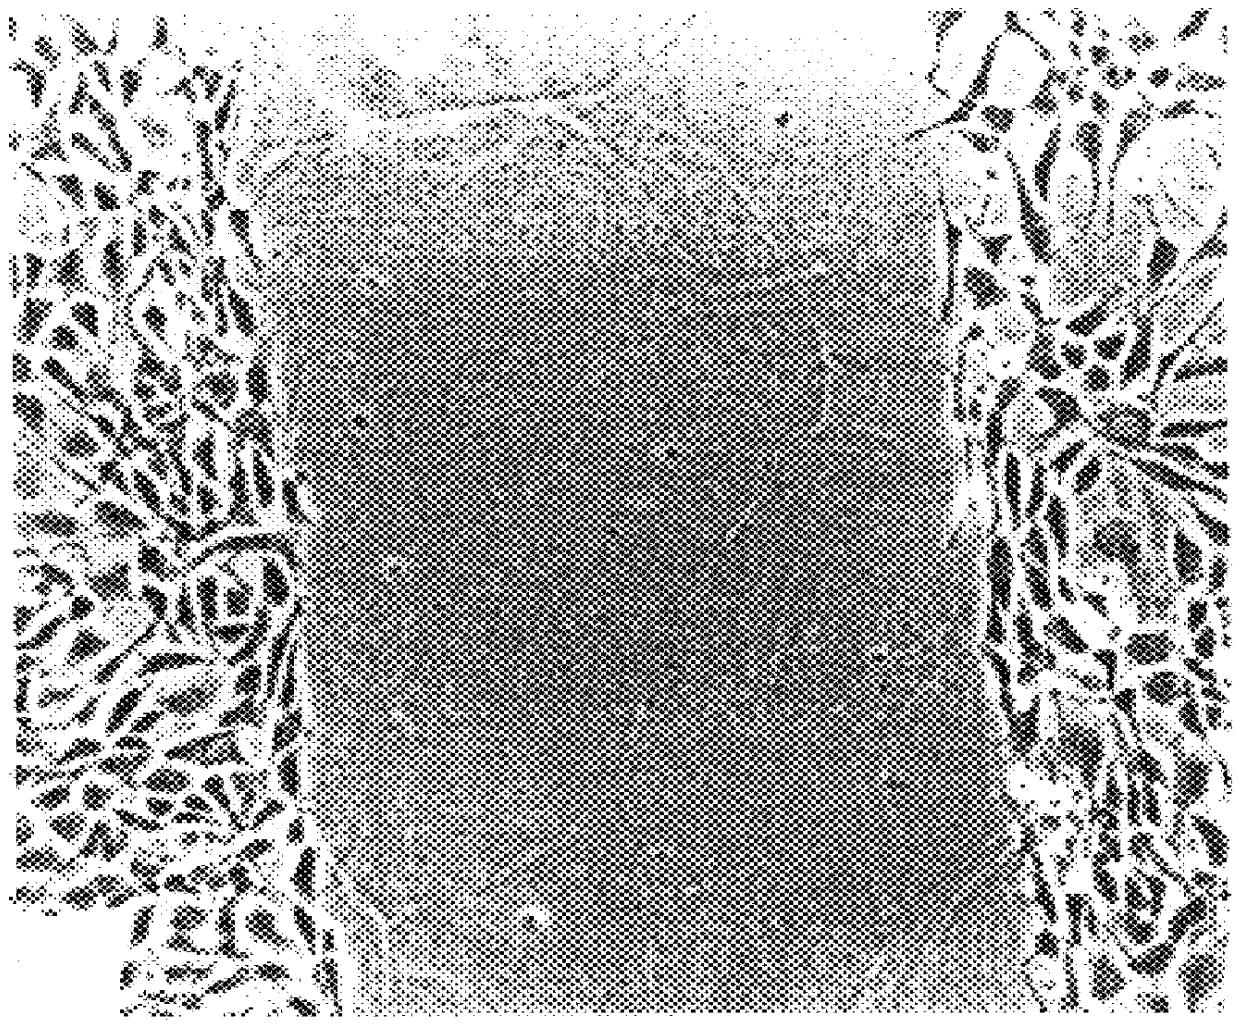 Method for inhibition of bone growth by anionic polymers